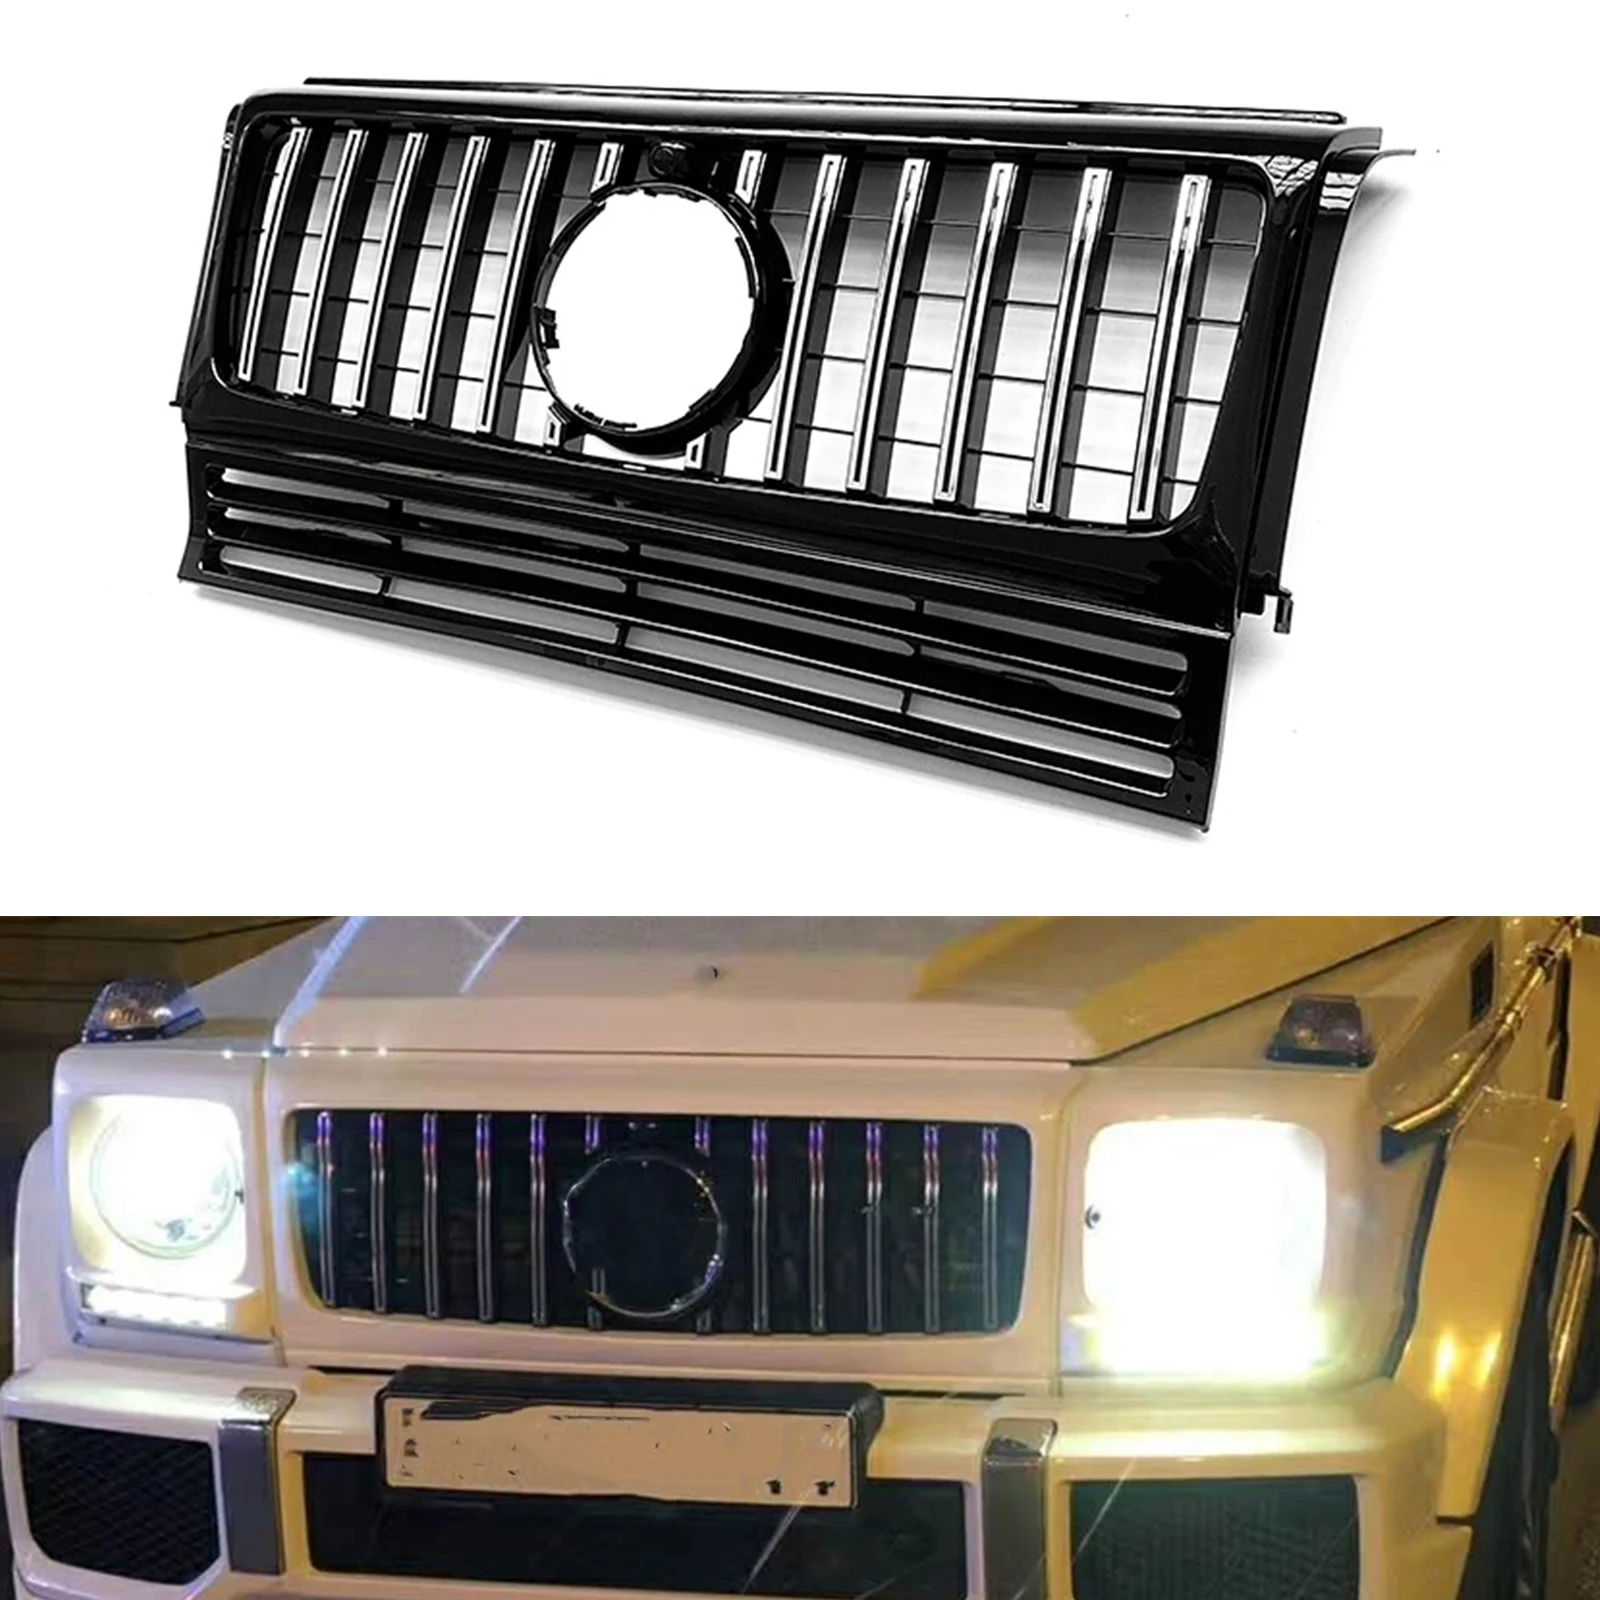 

Front Grille Racing Grill For Mercedes Benz G Class W463 G500 G550 G63 G65 G55 AMG 1990-2018 GT Style Car Upper Bumper Hood Mesh